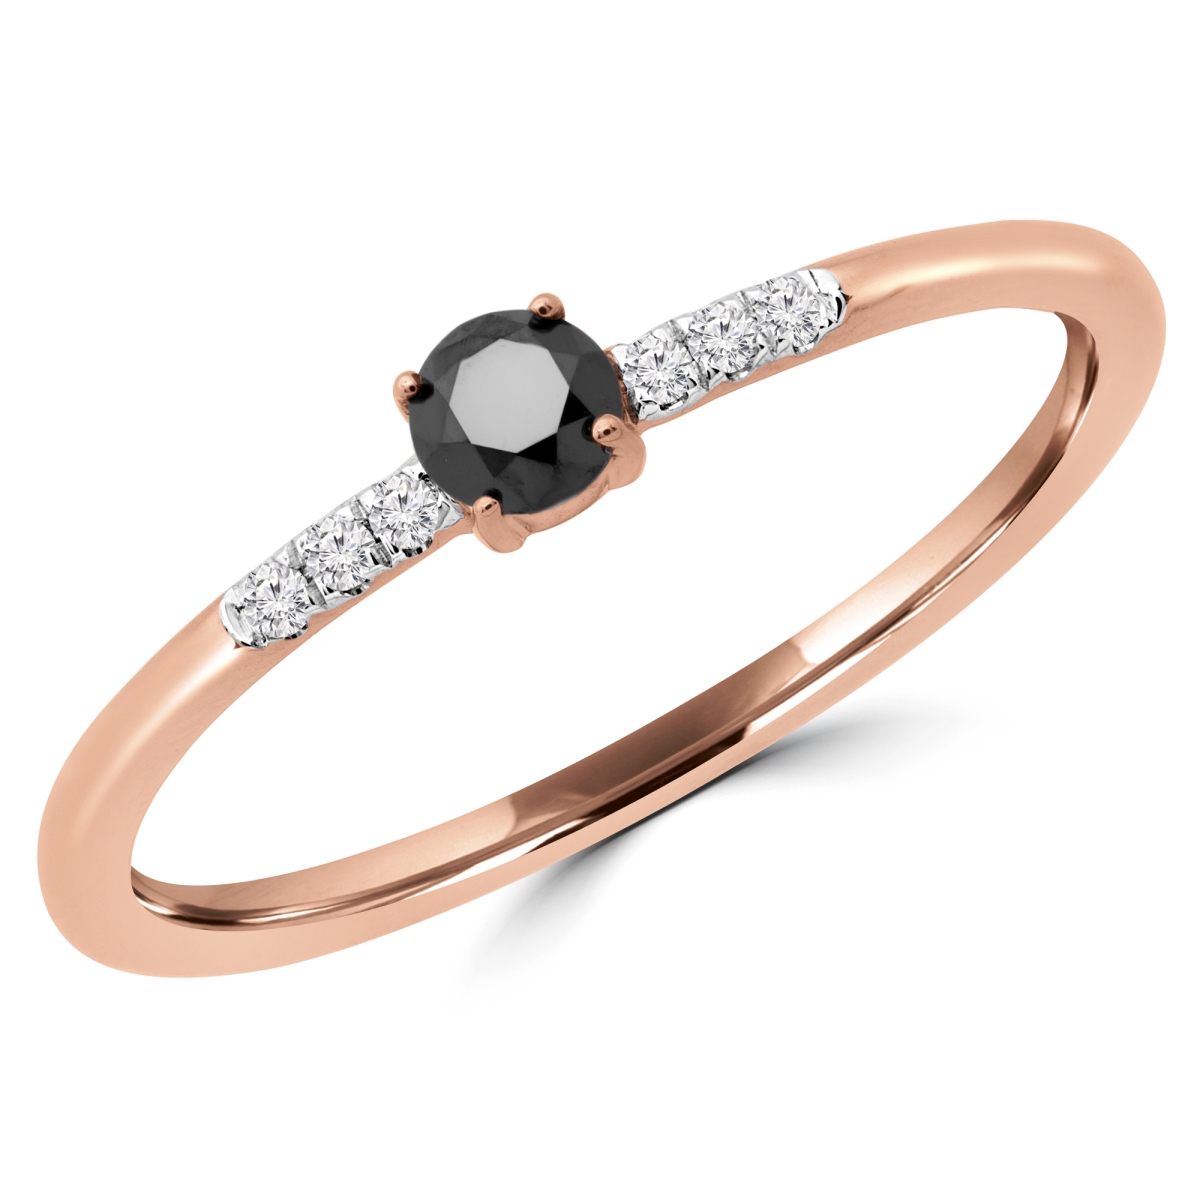 Picture of Majesty Diamonds MDR190079-4.25 0.16 CTW Round Black Diamond Bezel Set Cocktail Ring in 14K Rose Gold - Size 4.25